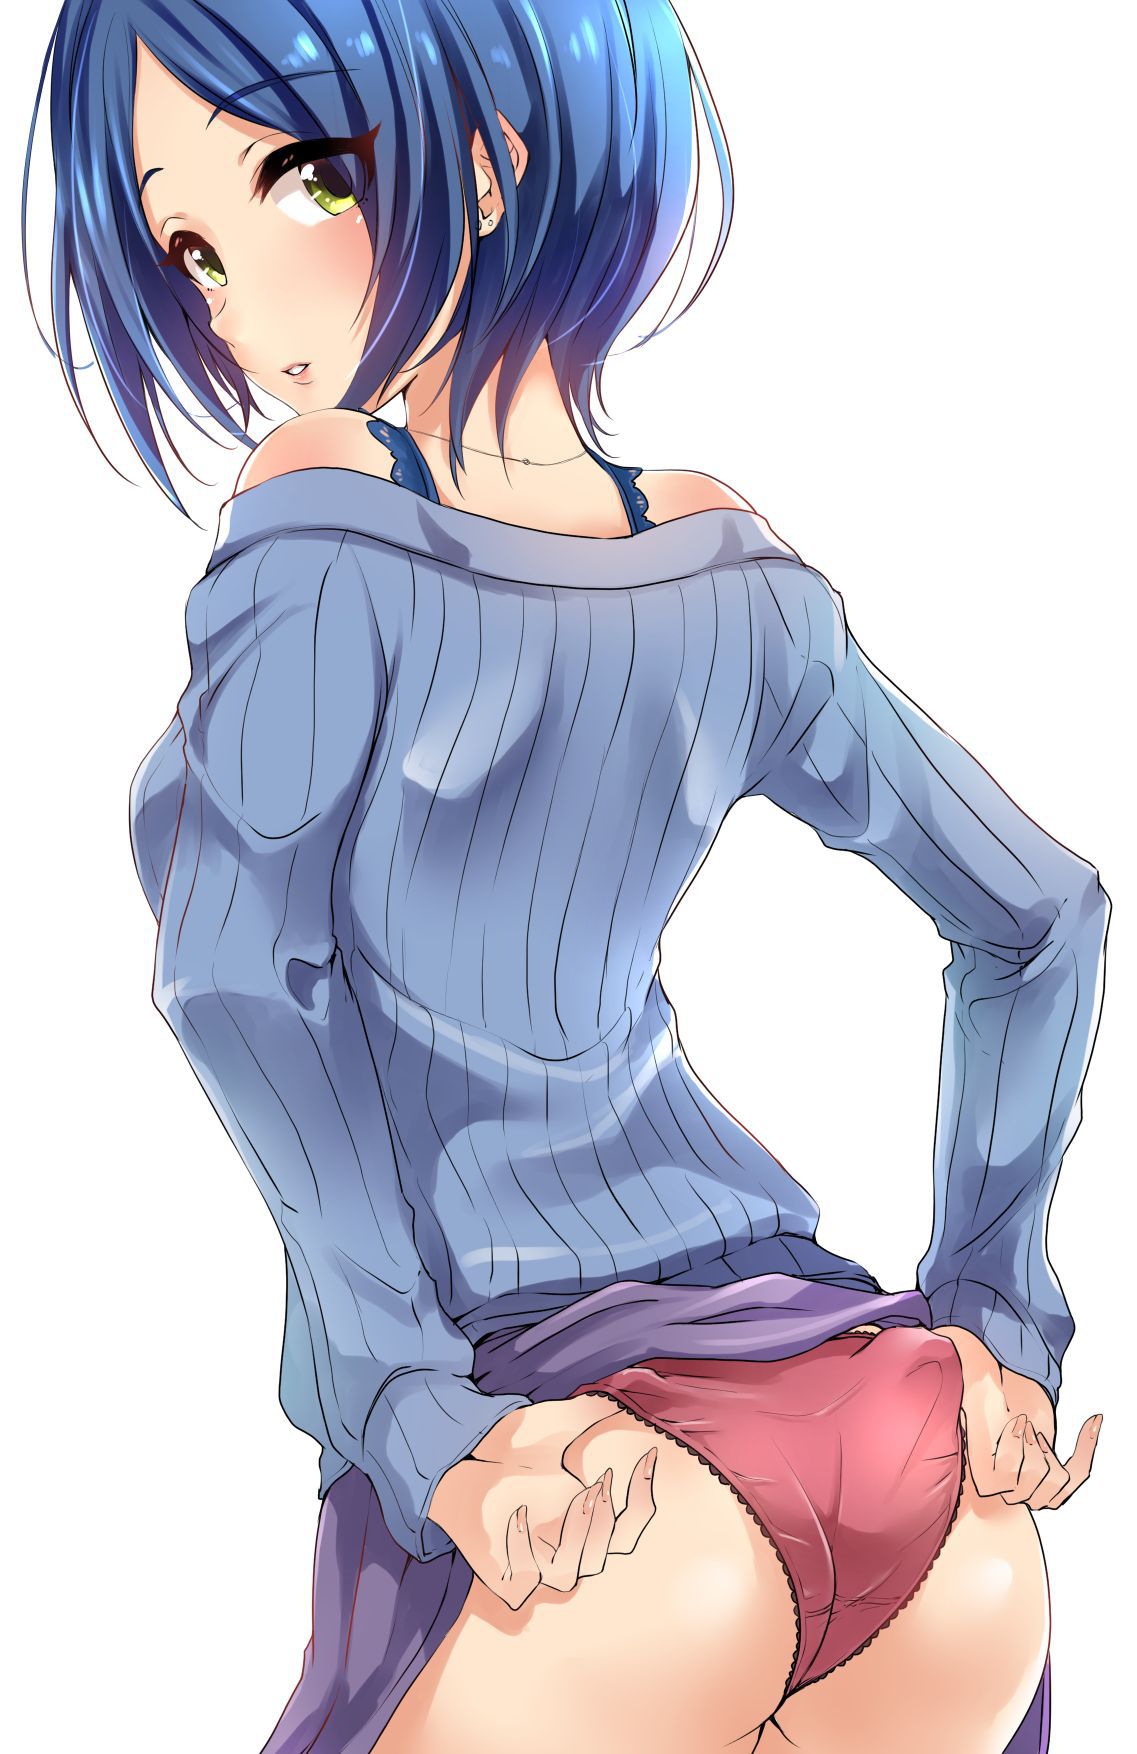 【Secondary Erotic】 Erotic image of a naughty girl fixing a swimsuit or pants that has been eaten up is here 4